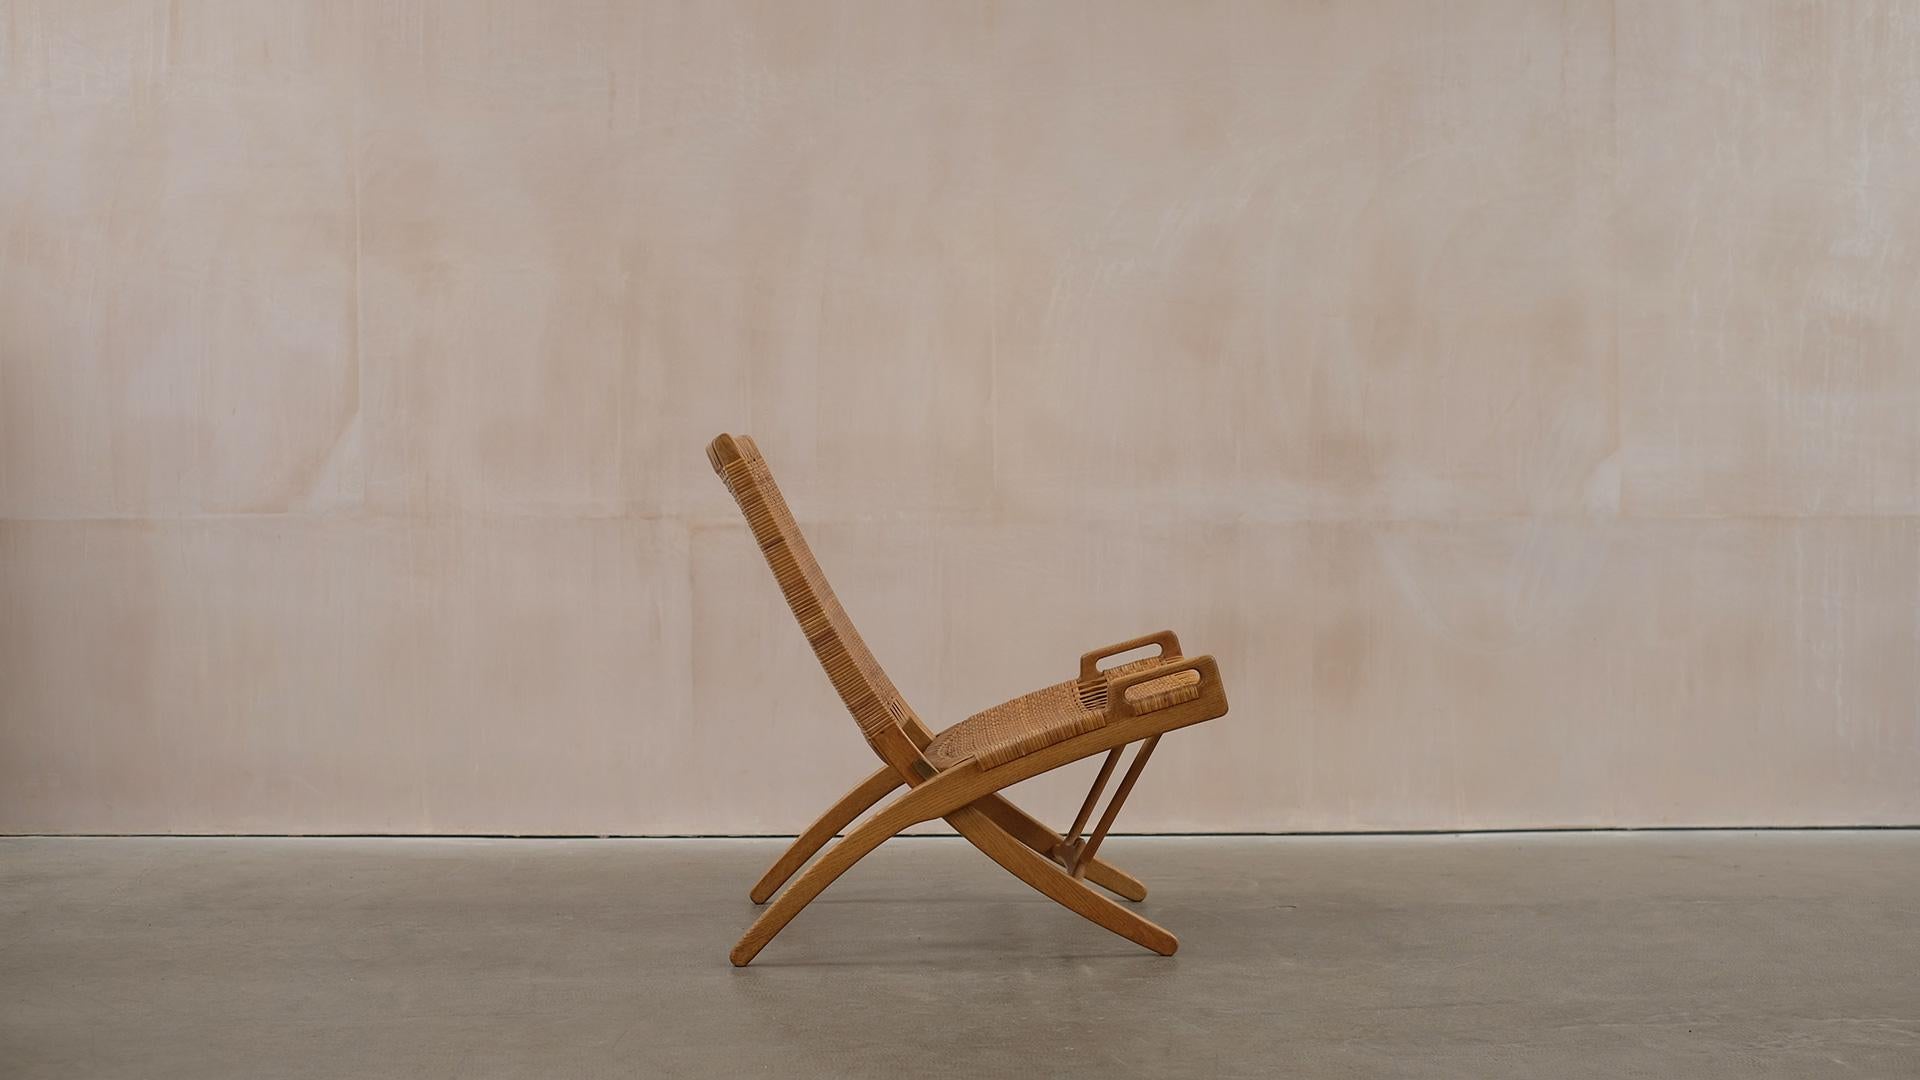 Folding chair in oak and cane designed by Hans Wegner for cabinetmaker Johannes Hansen model JH512, Denmark 1949.  Wonderful example with beautiful patina. The cane is in very nice condition with a few minor historic repairs but supportive and